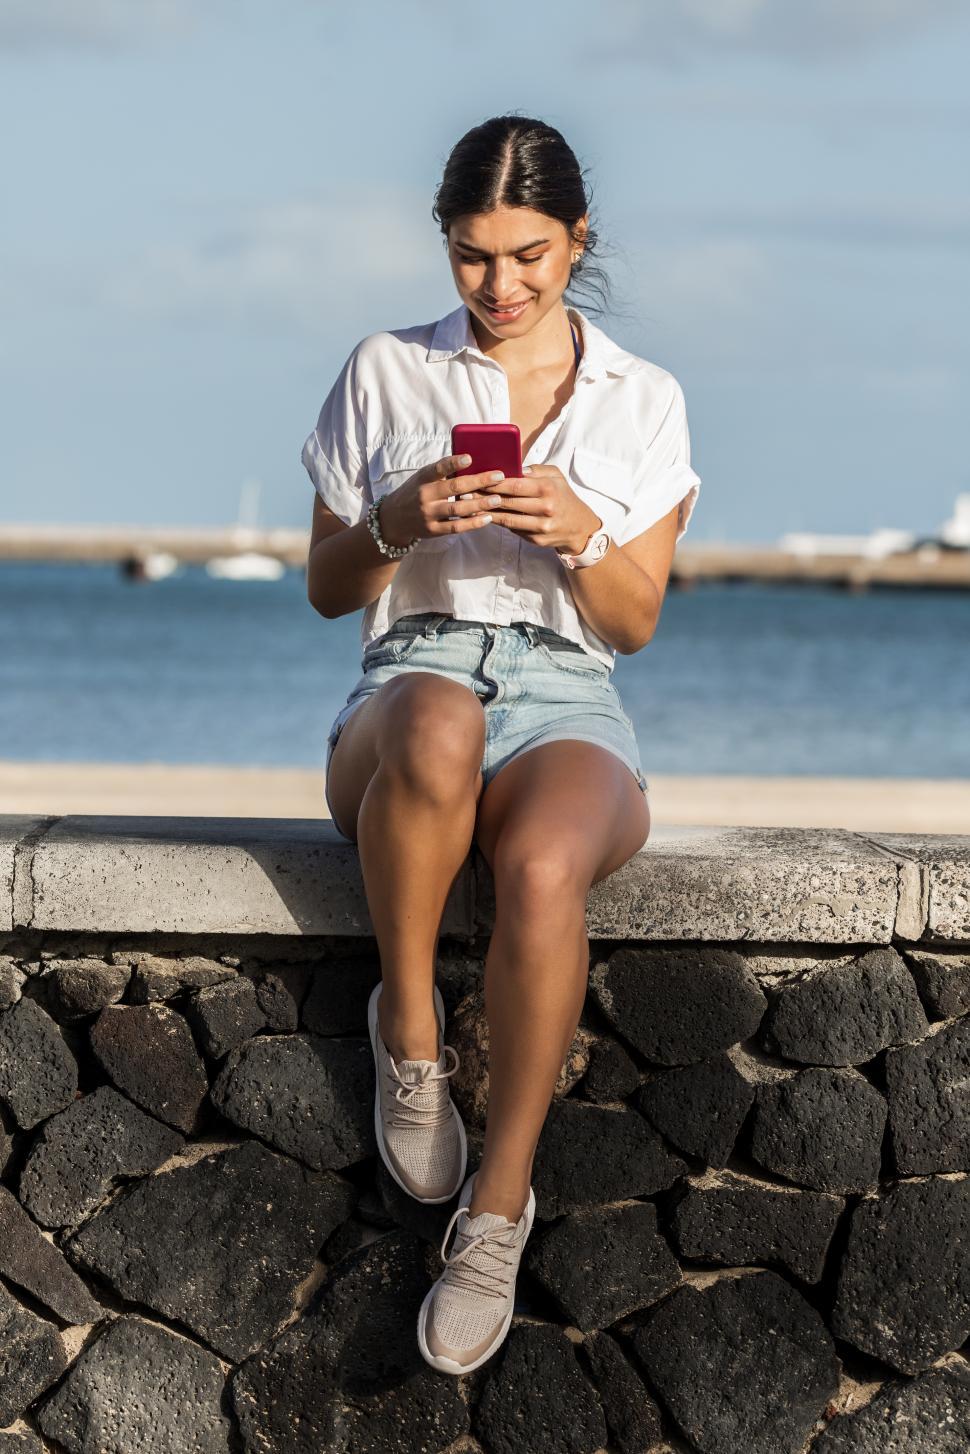 Free Image of Smiling woman messaging on mobile phone at seafront 